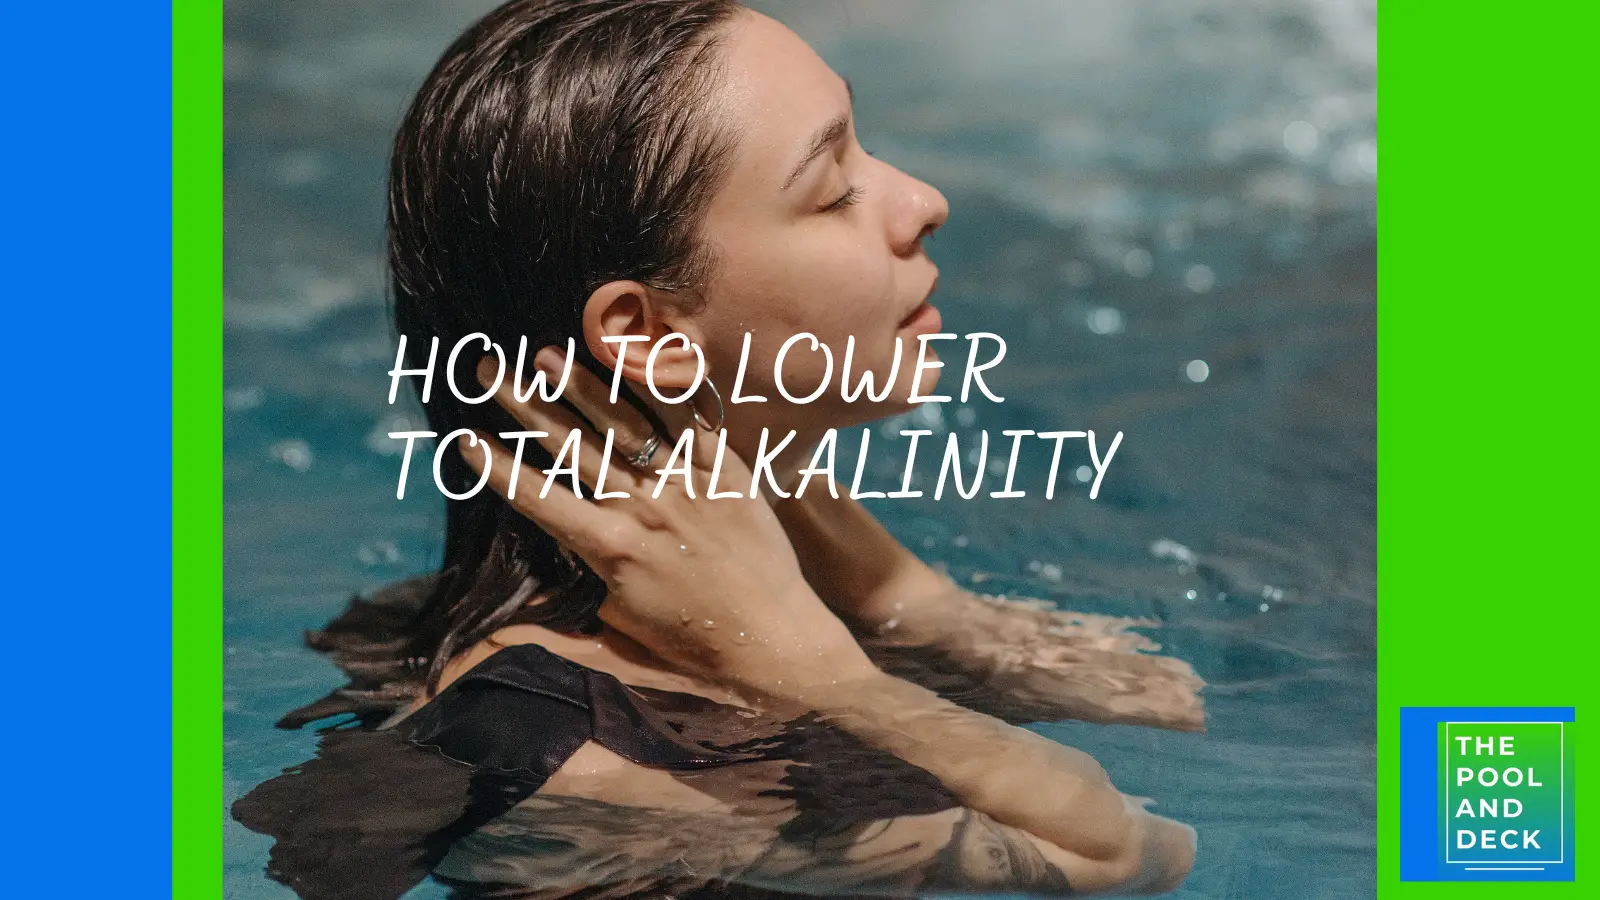 How to Lower Total Alkalininty in a Pool the Easy Way